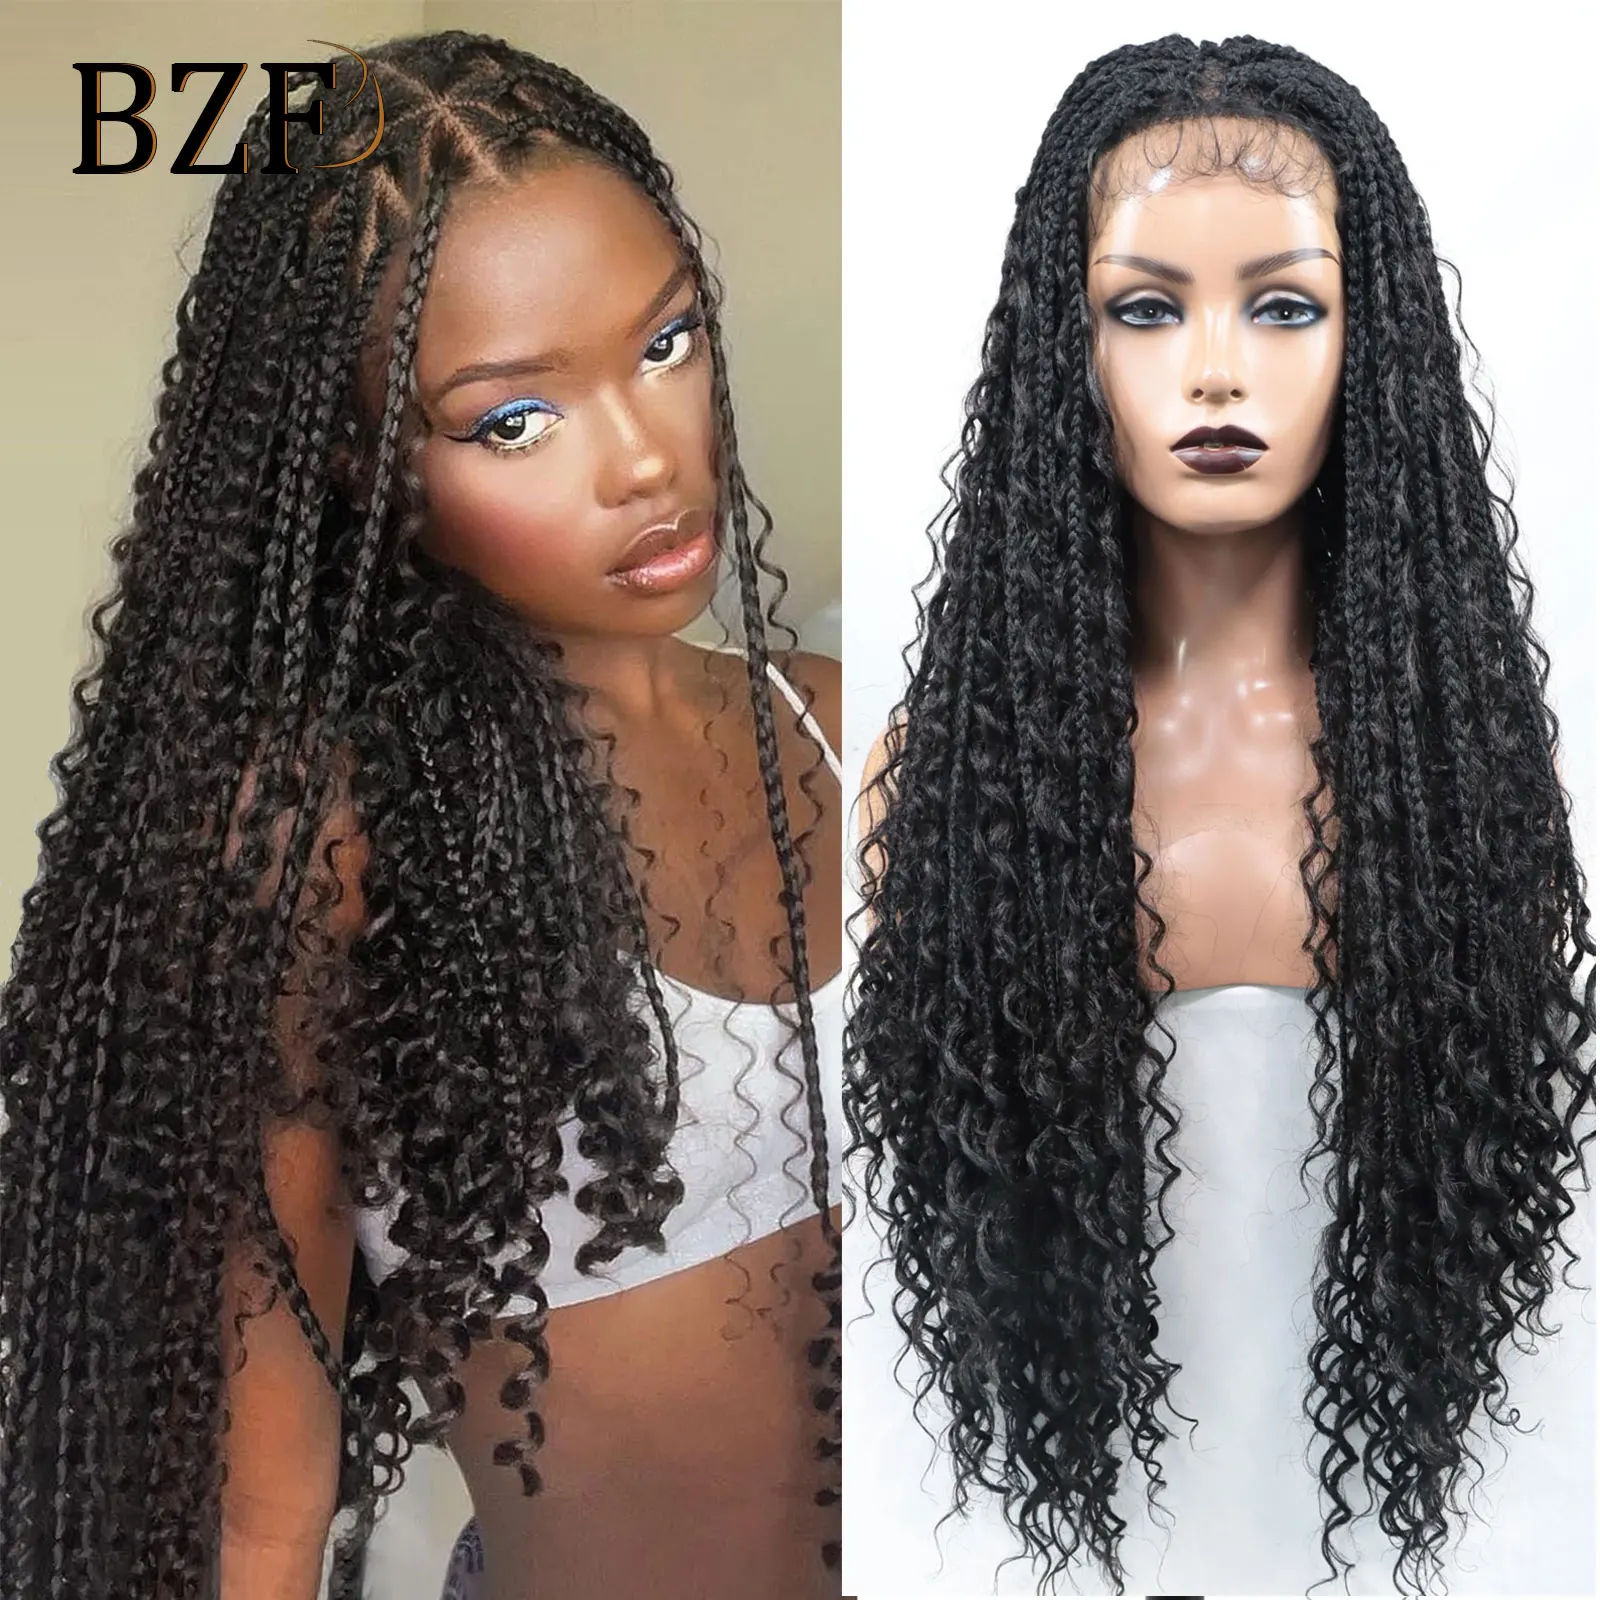 Boho Box Braid Wigs Curly Ends Square Part Braided Lace Front Wigs